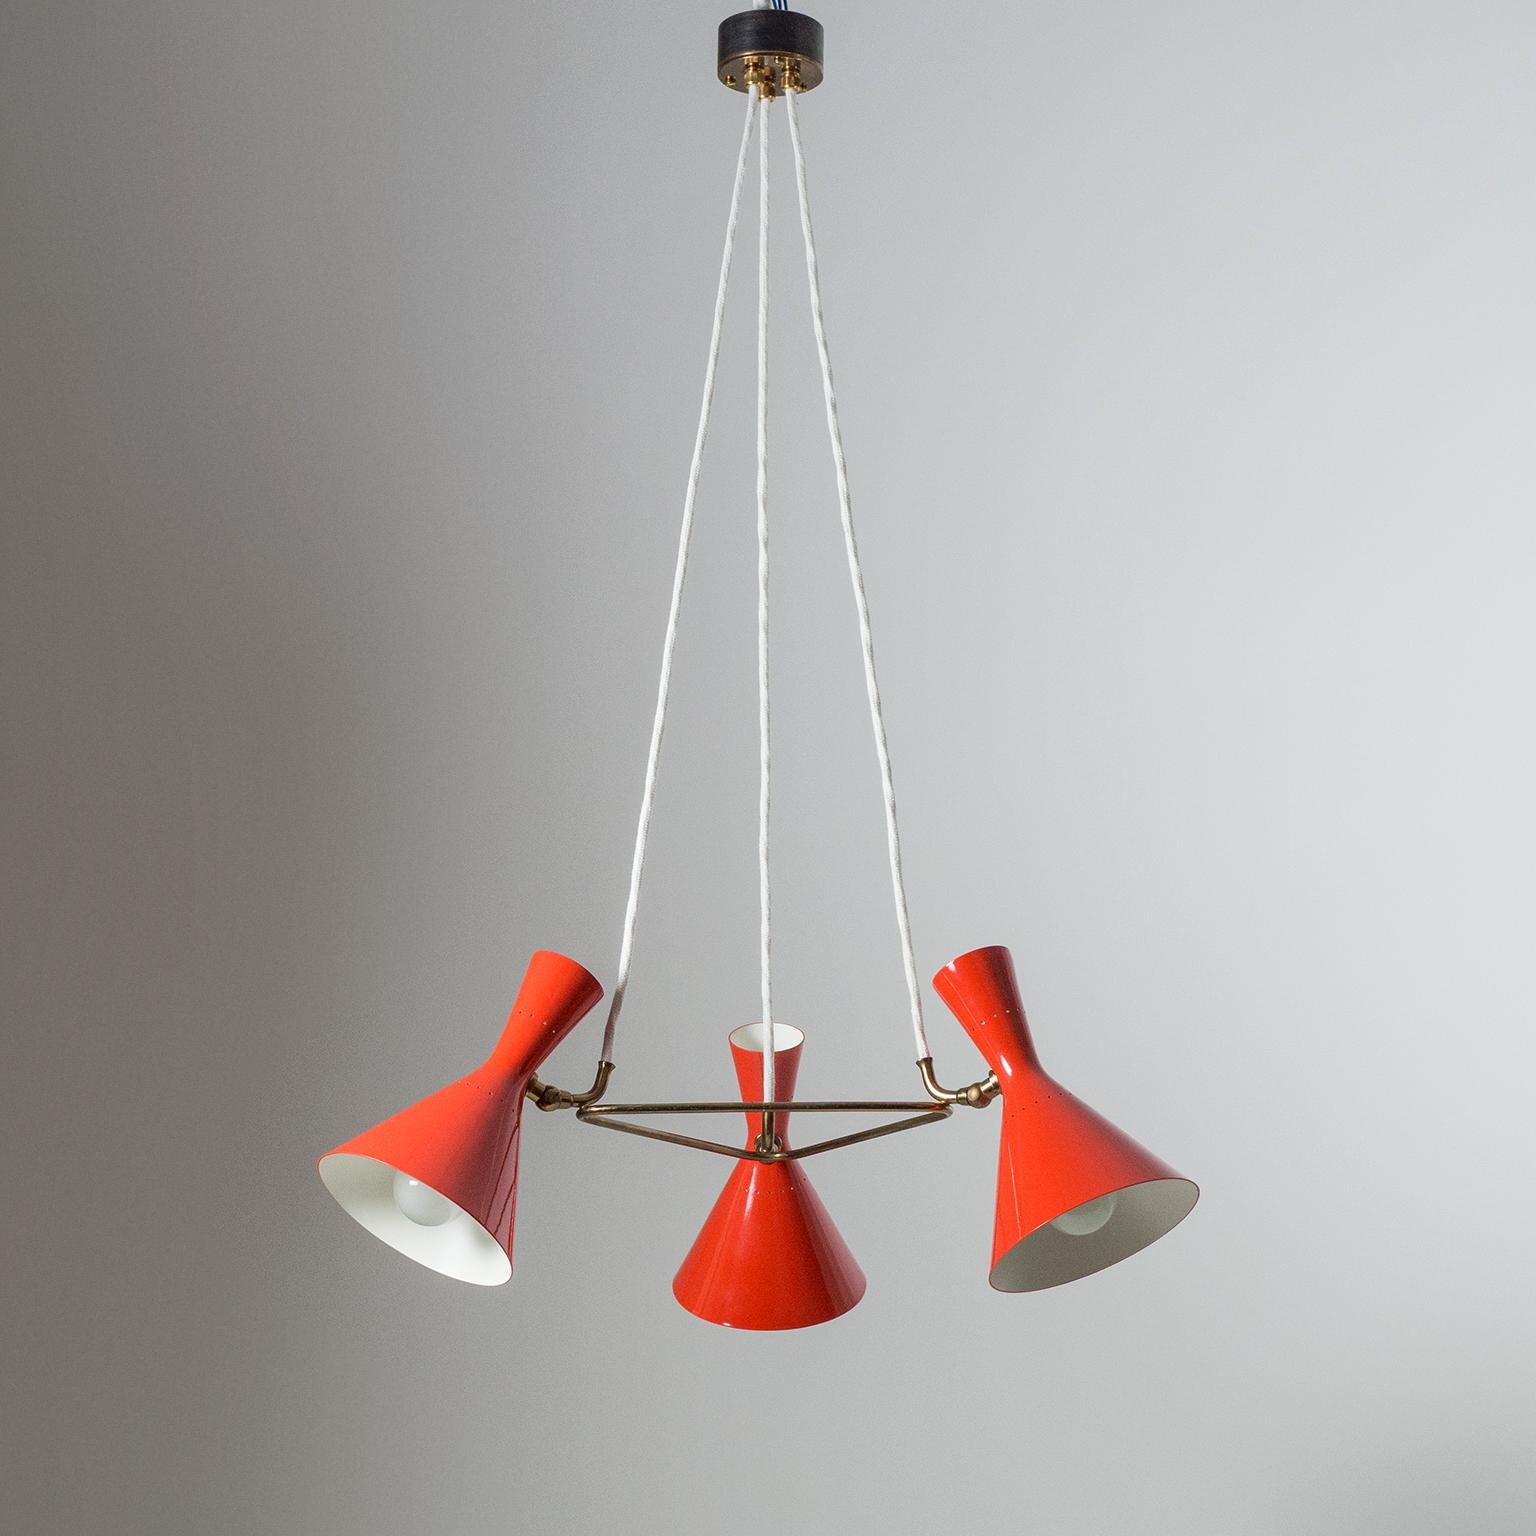 Lovely original cone chandelier from the 1950s by Baumann Kölliker which produced several high quality models for Stilnovo. Three bright red double cone (